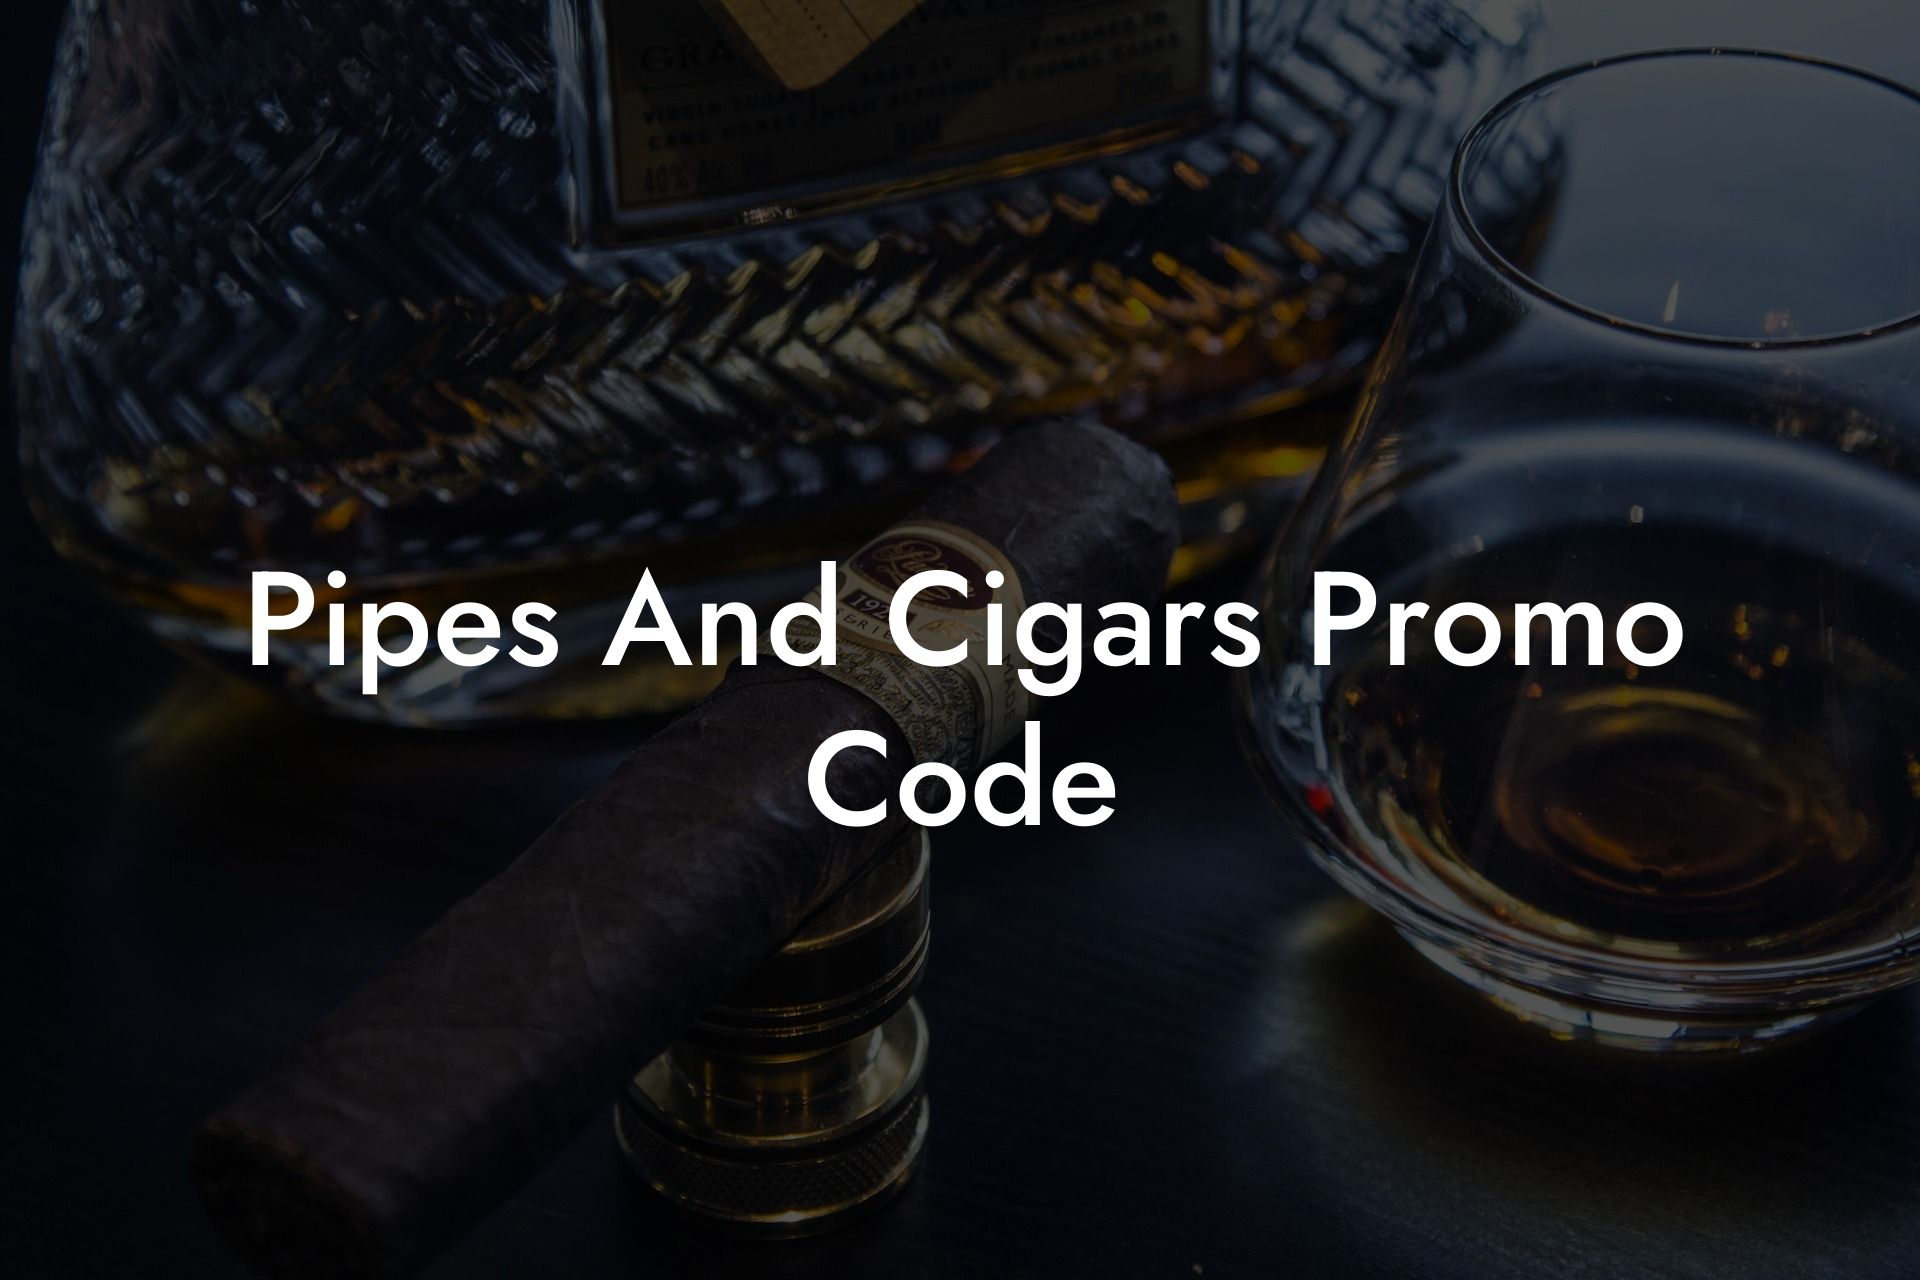 Pipes And Cigars Promo Code